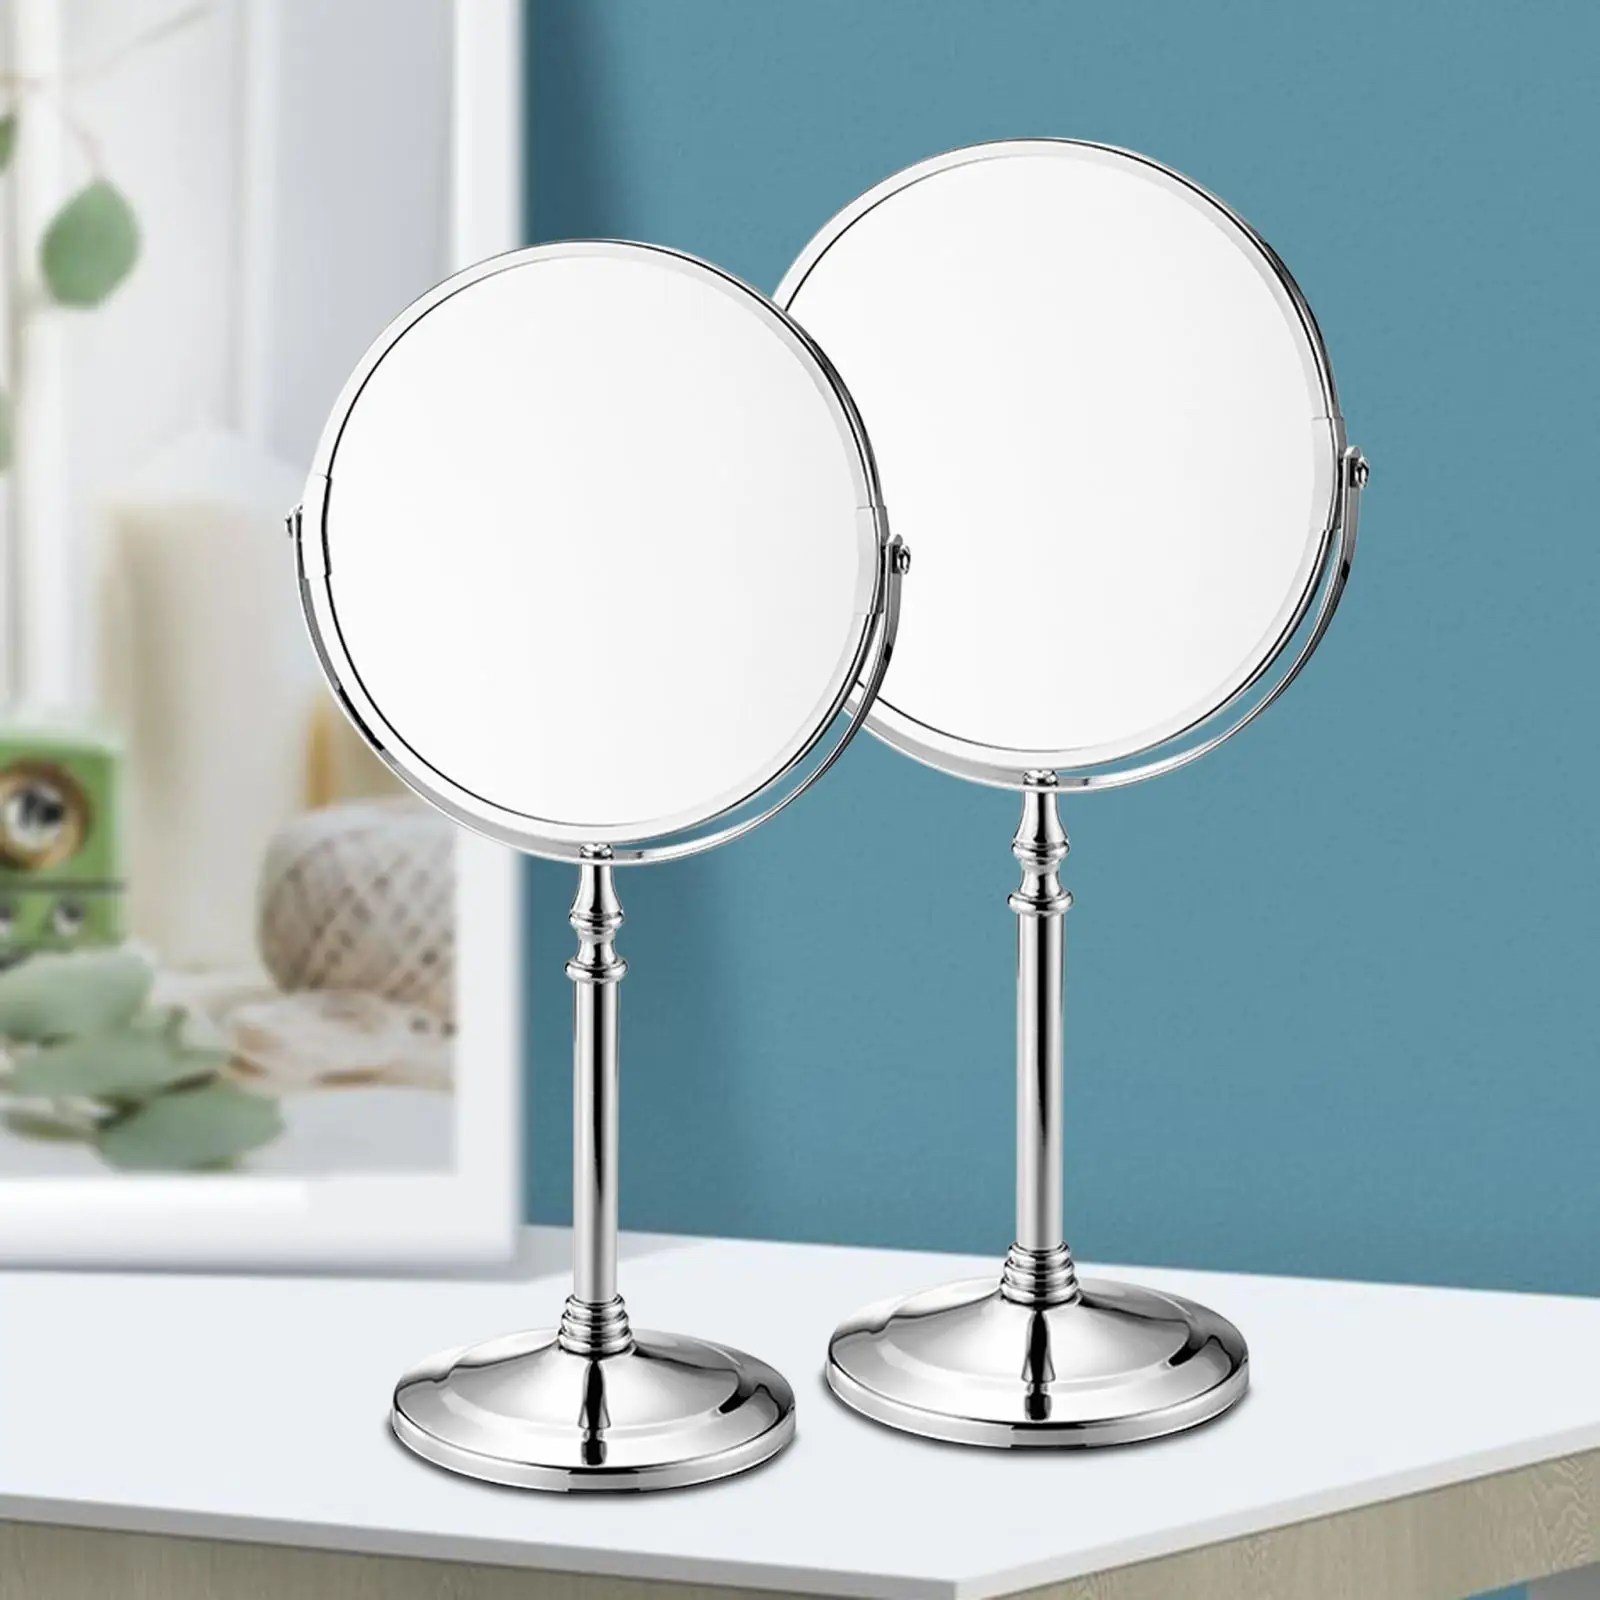 Double Sided Makeup Mirror Thick Base and Frame Round Tabletop Cosmetic Mirror for Bathroom Dresser Bedroom Home Girls Women